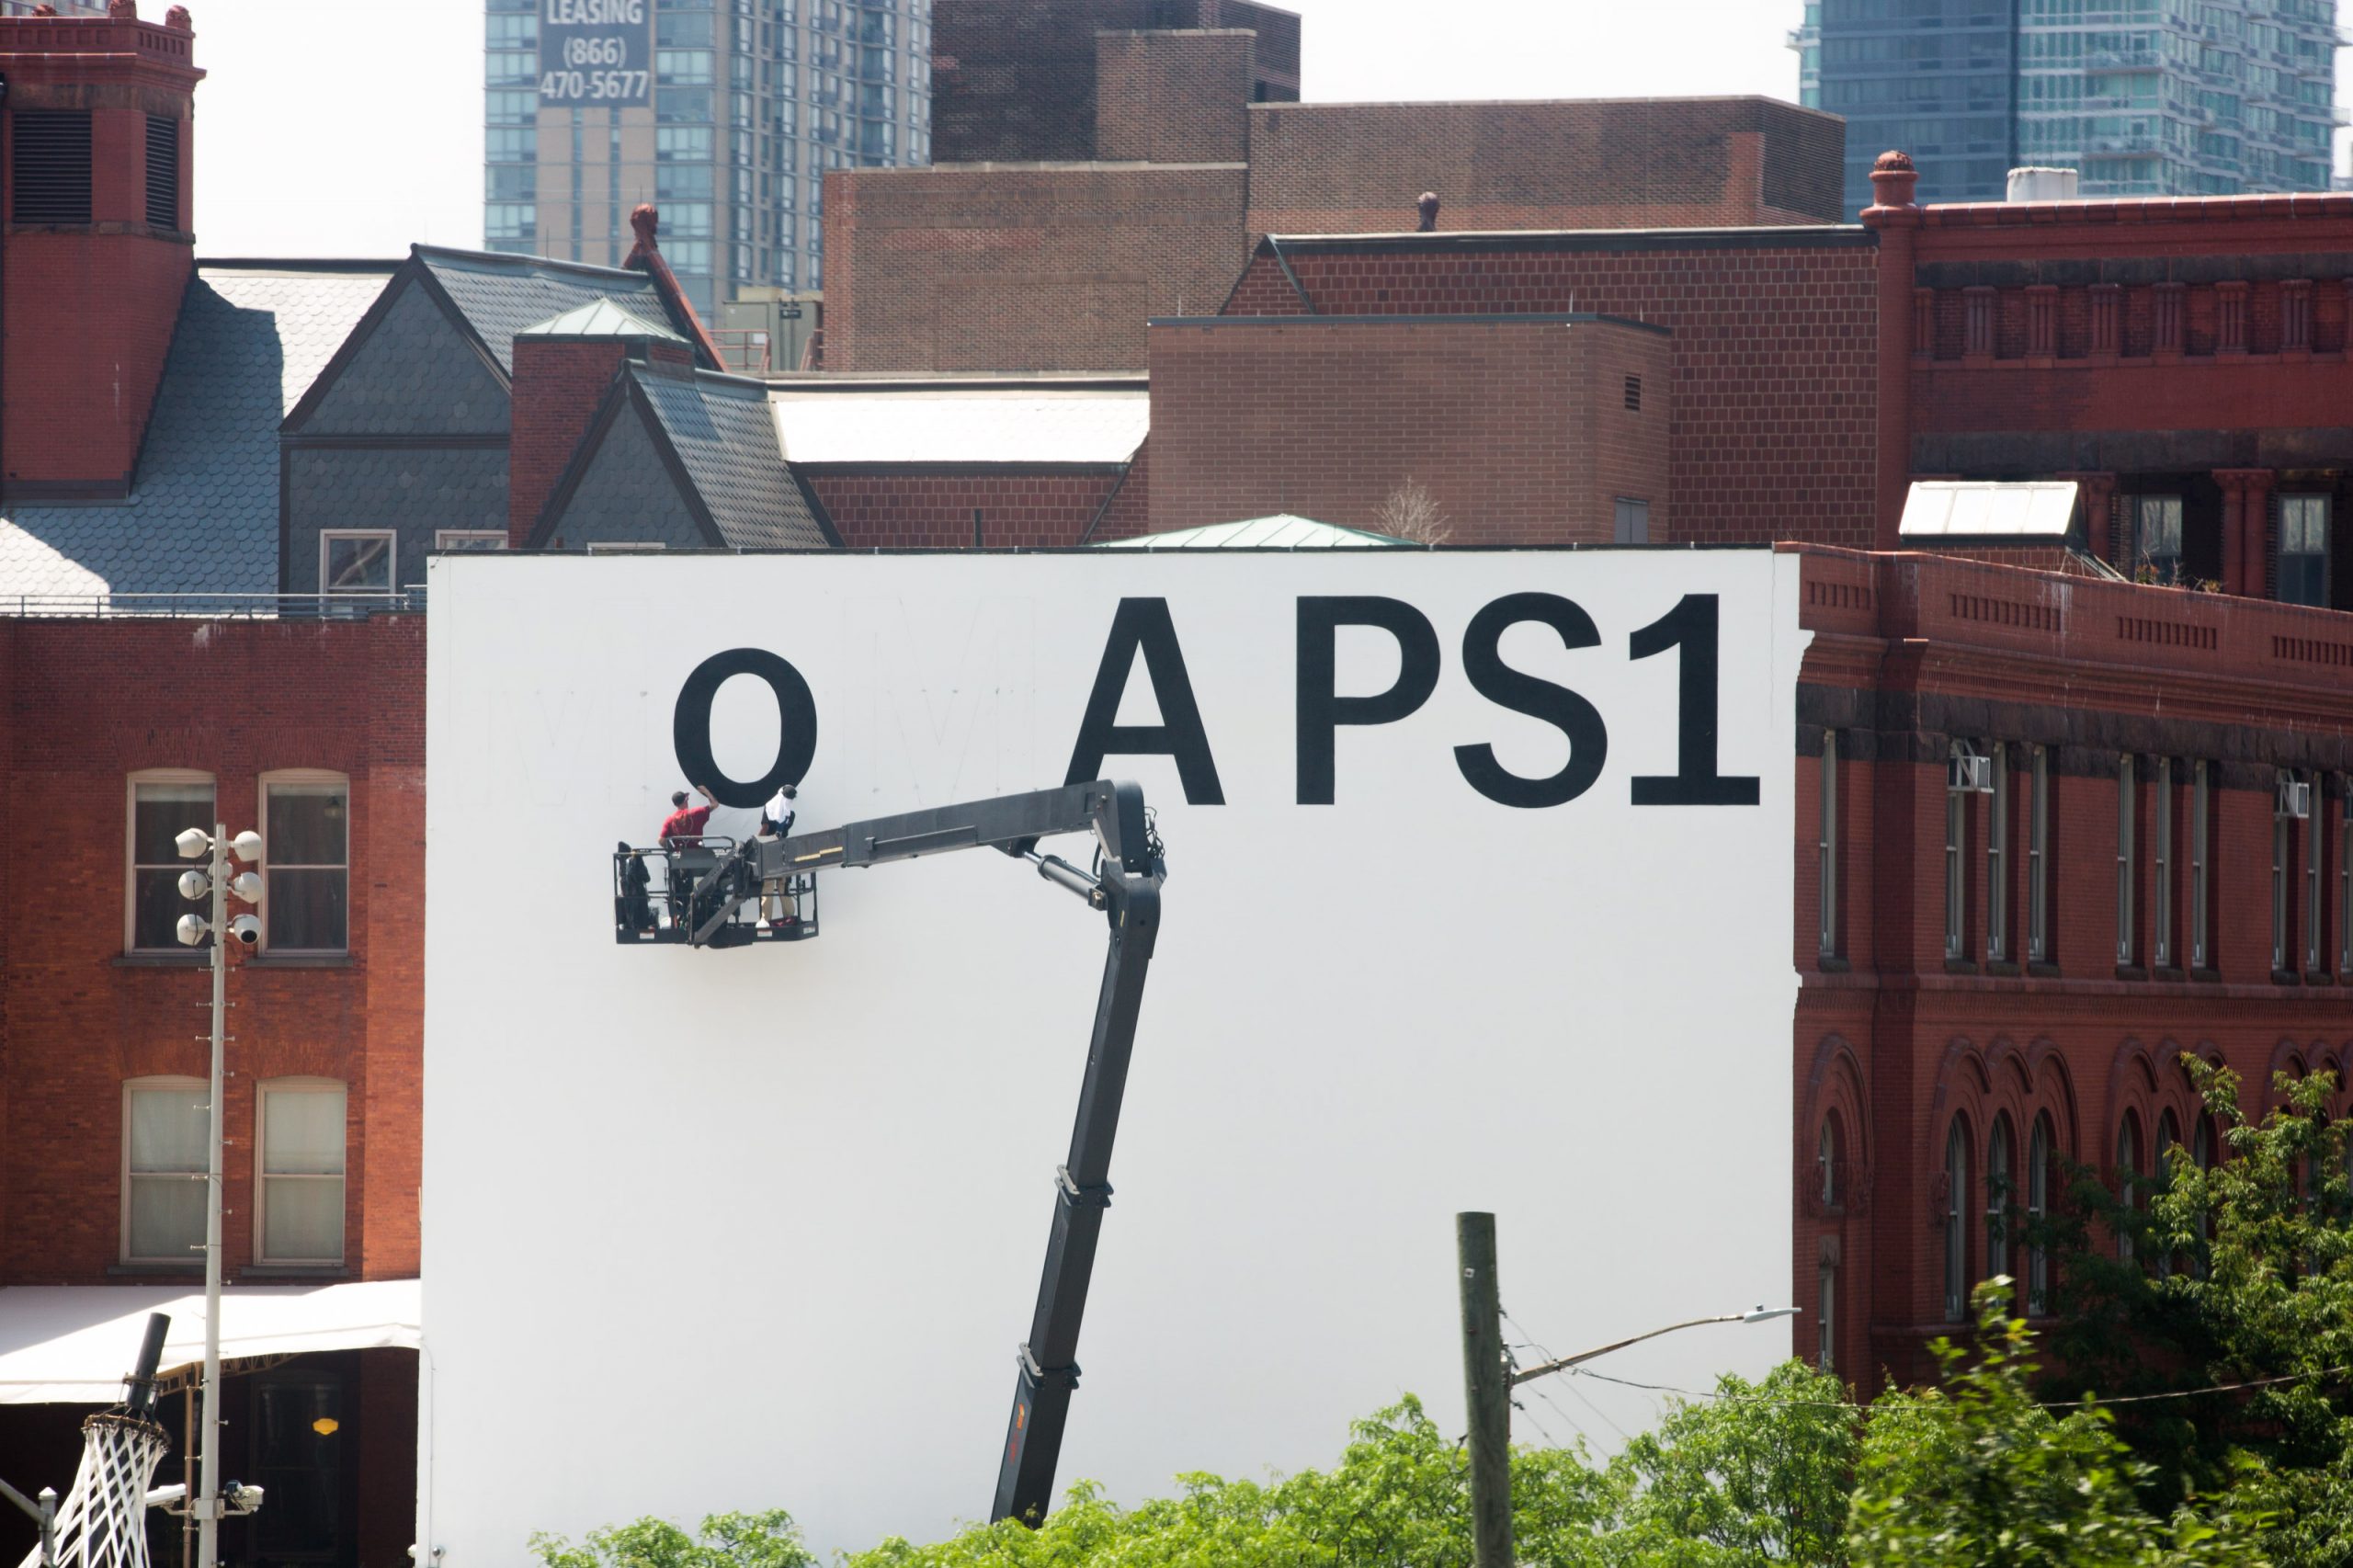 MoMA PS1 mural hand-painted by Colossal Media.